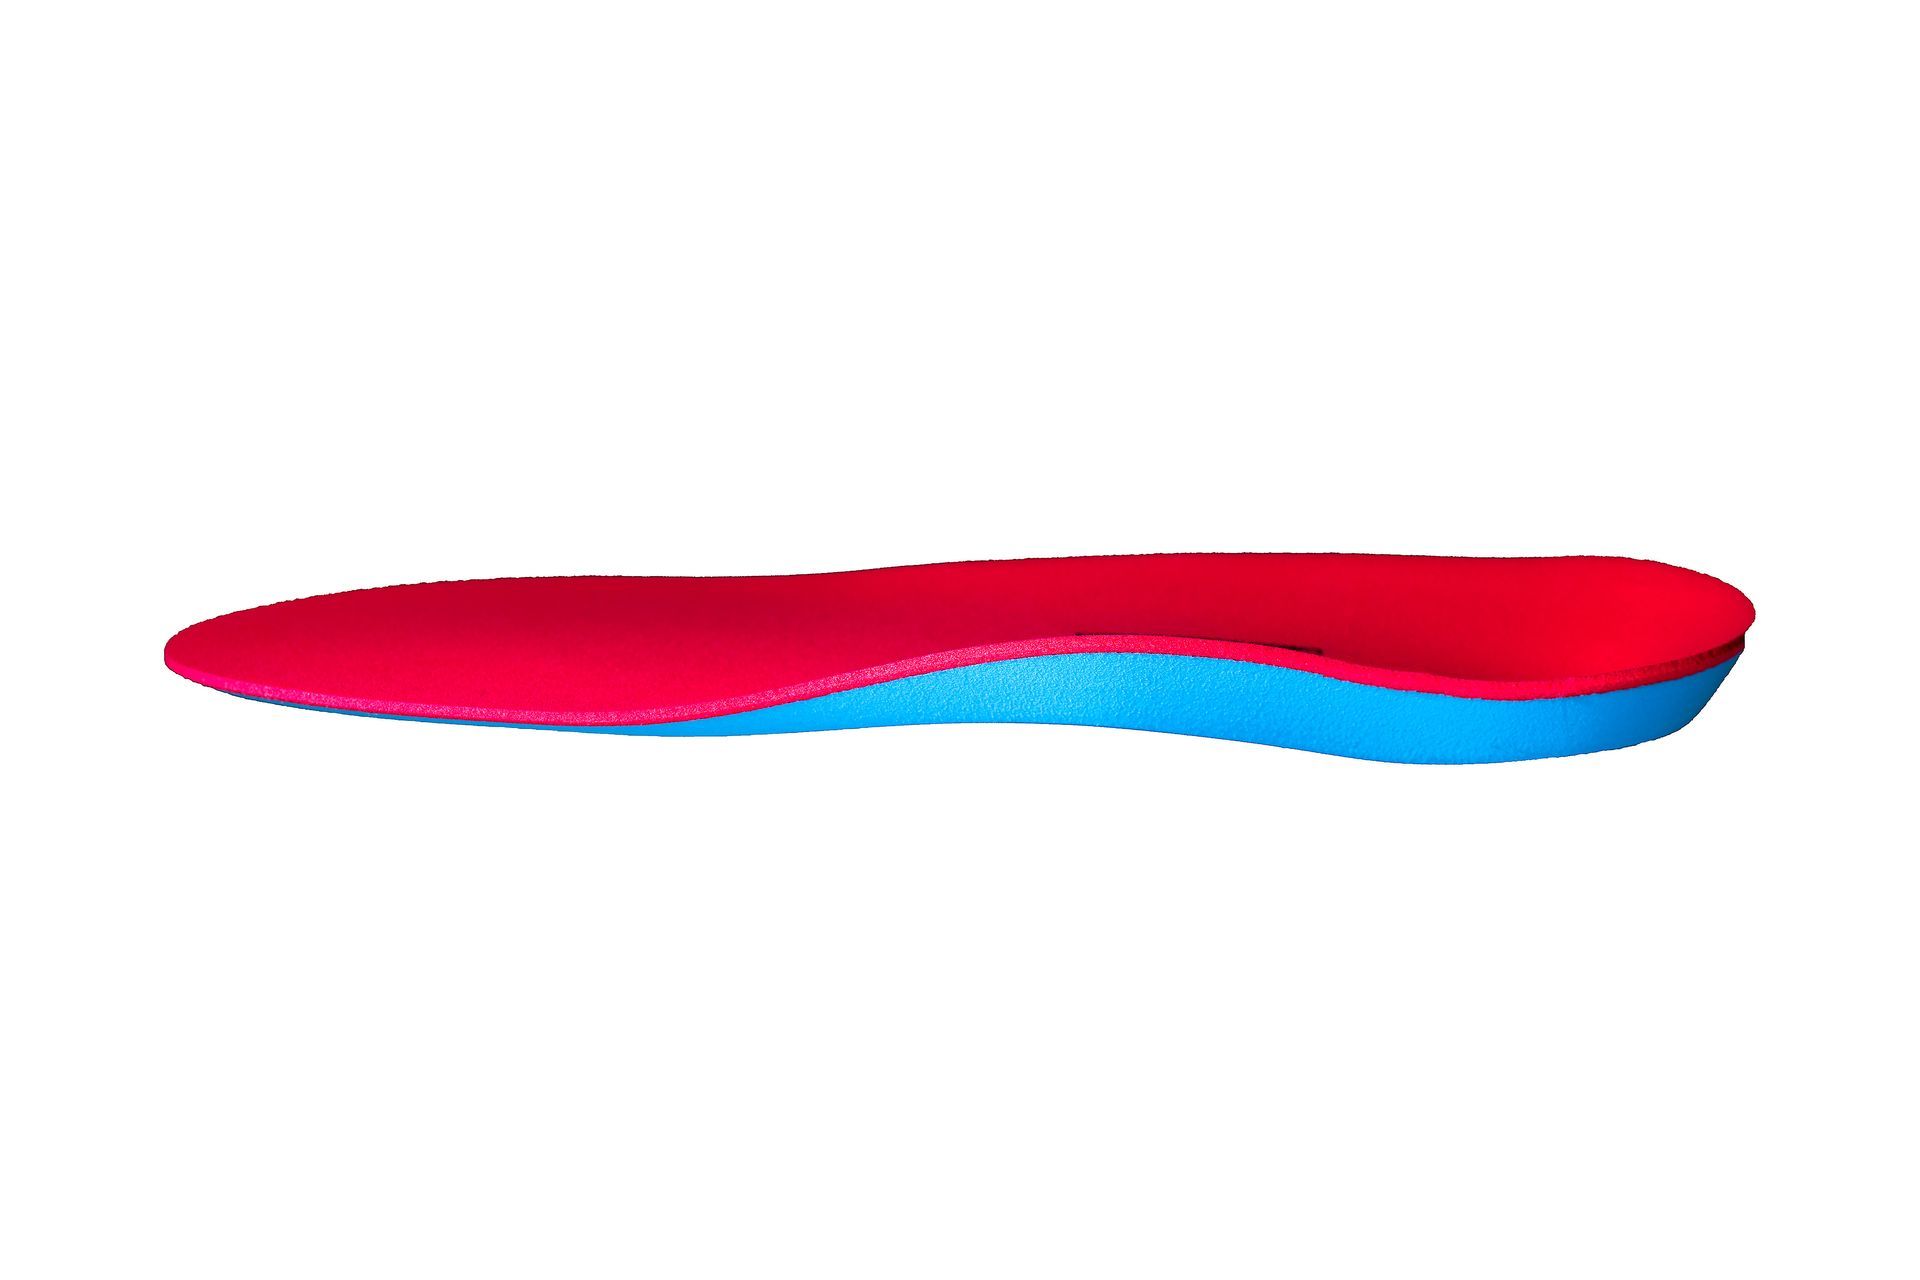 Custom Orthotics vs. Over-the-Counter Inserts: Which is Best?